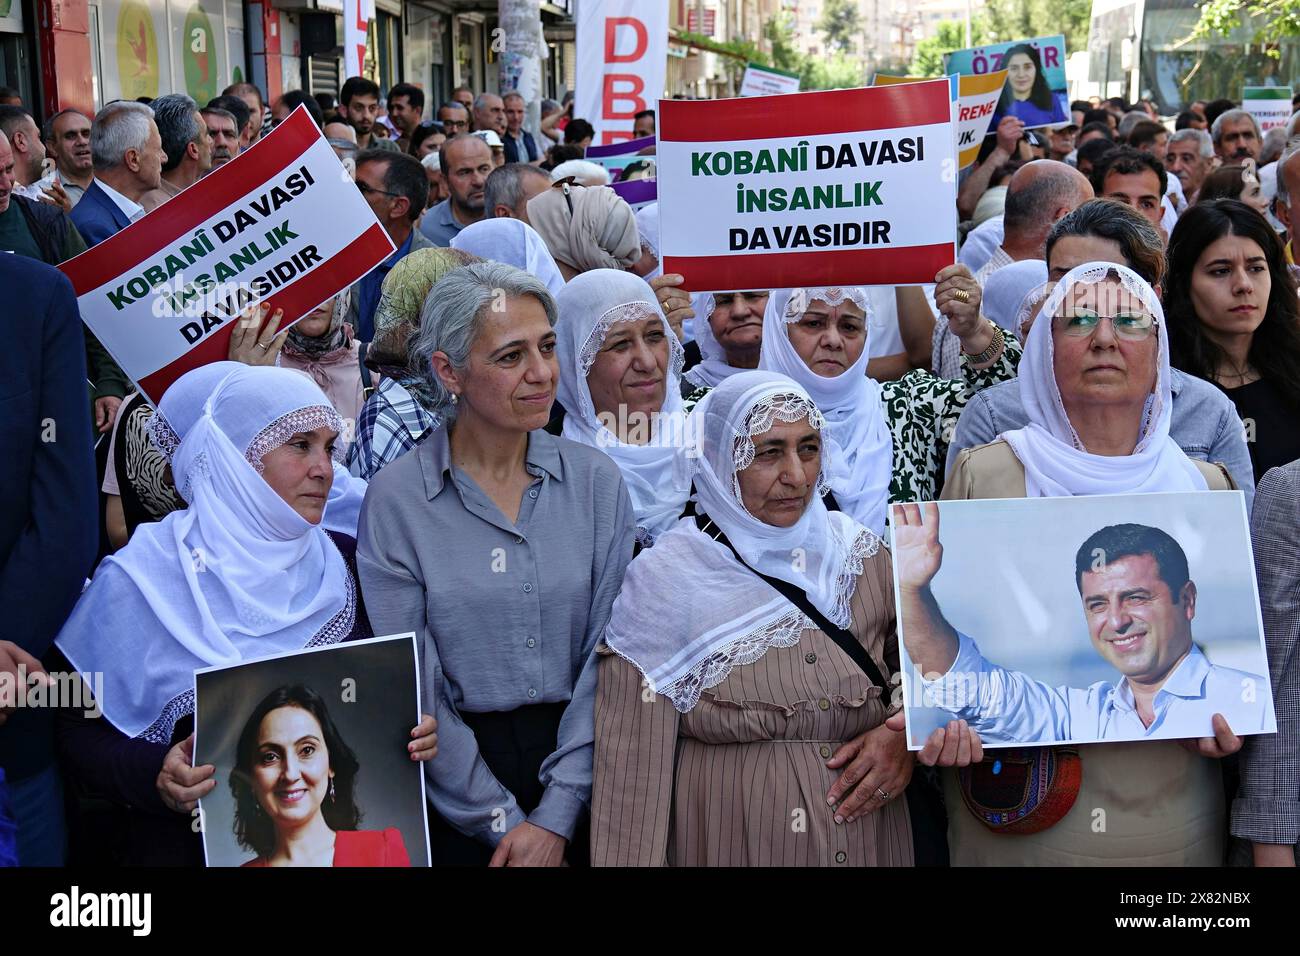 May 22, 2024, Diyarbakir, Turkey: Democratic Regions Party (DBP) Co-Chairman Cigdem Kilicgun Ucar (L2) is seen with Kurdish women carrying posters of Selahattin Demirtas and Figen Yuksekdag during the demonstration. The long prison sentences given to some Kurdish politicians in Turkey were protested with a march and press statement organized by the People's Equality and Democracy Party (DEM Party), Democratic Regions Party (DBP) and the Free Women's Movement (TJA-Tevgera JinÃªn Azad) organization in Diyarbakir. Many police officers were seen during the protest, but despite the obstacle from th Stock Photo